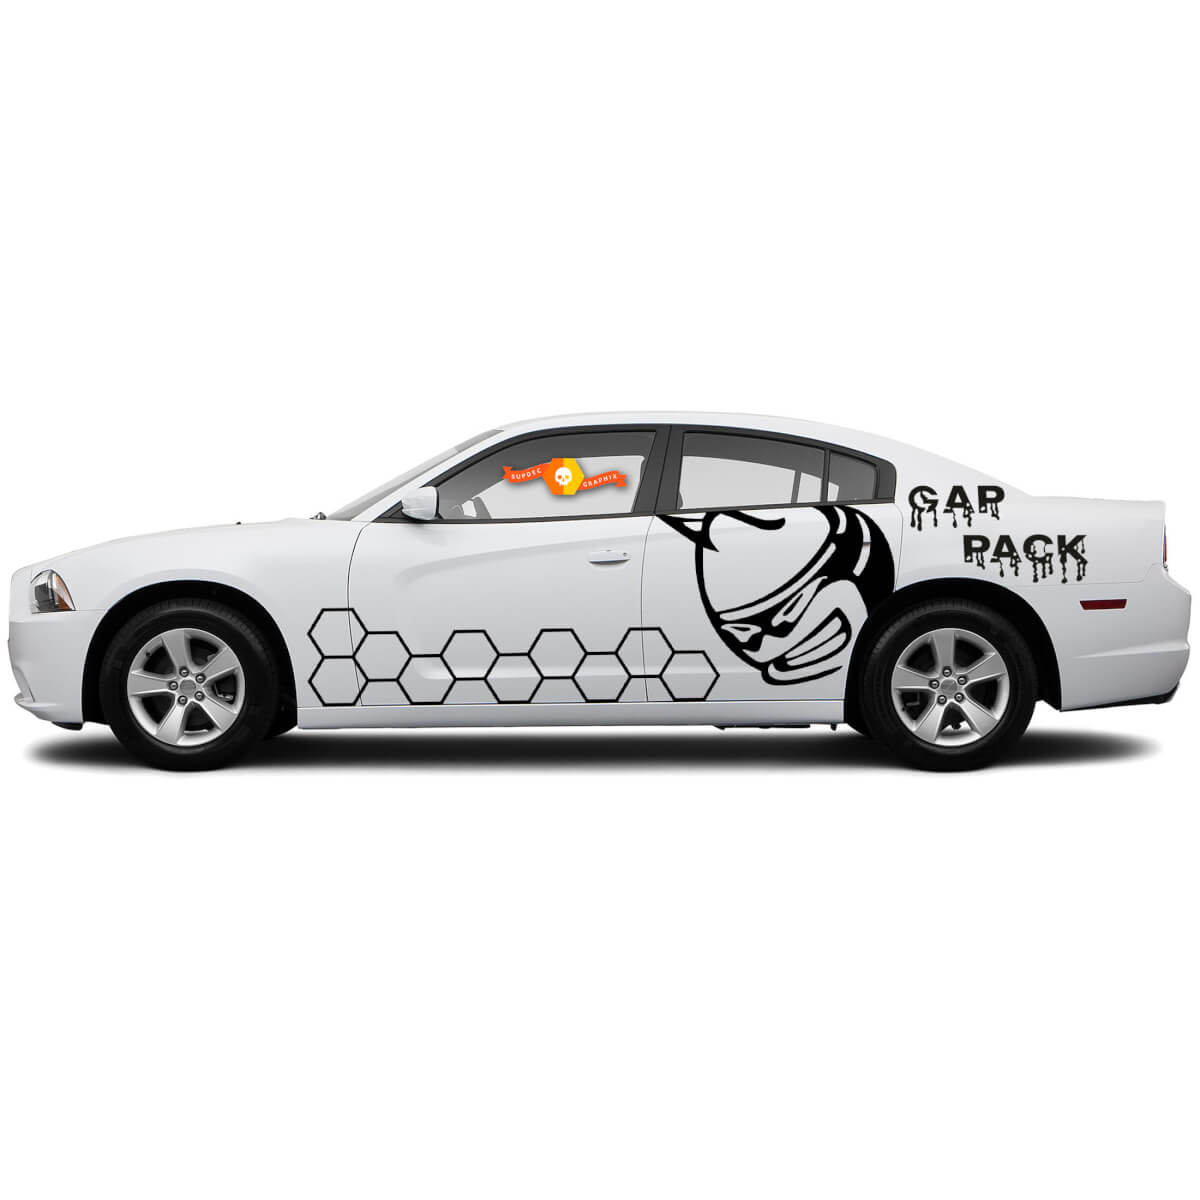 Dodge Charger or Challenger Gap Pack ScatPack Honeycomb Stripes Decal Sticker